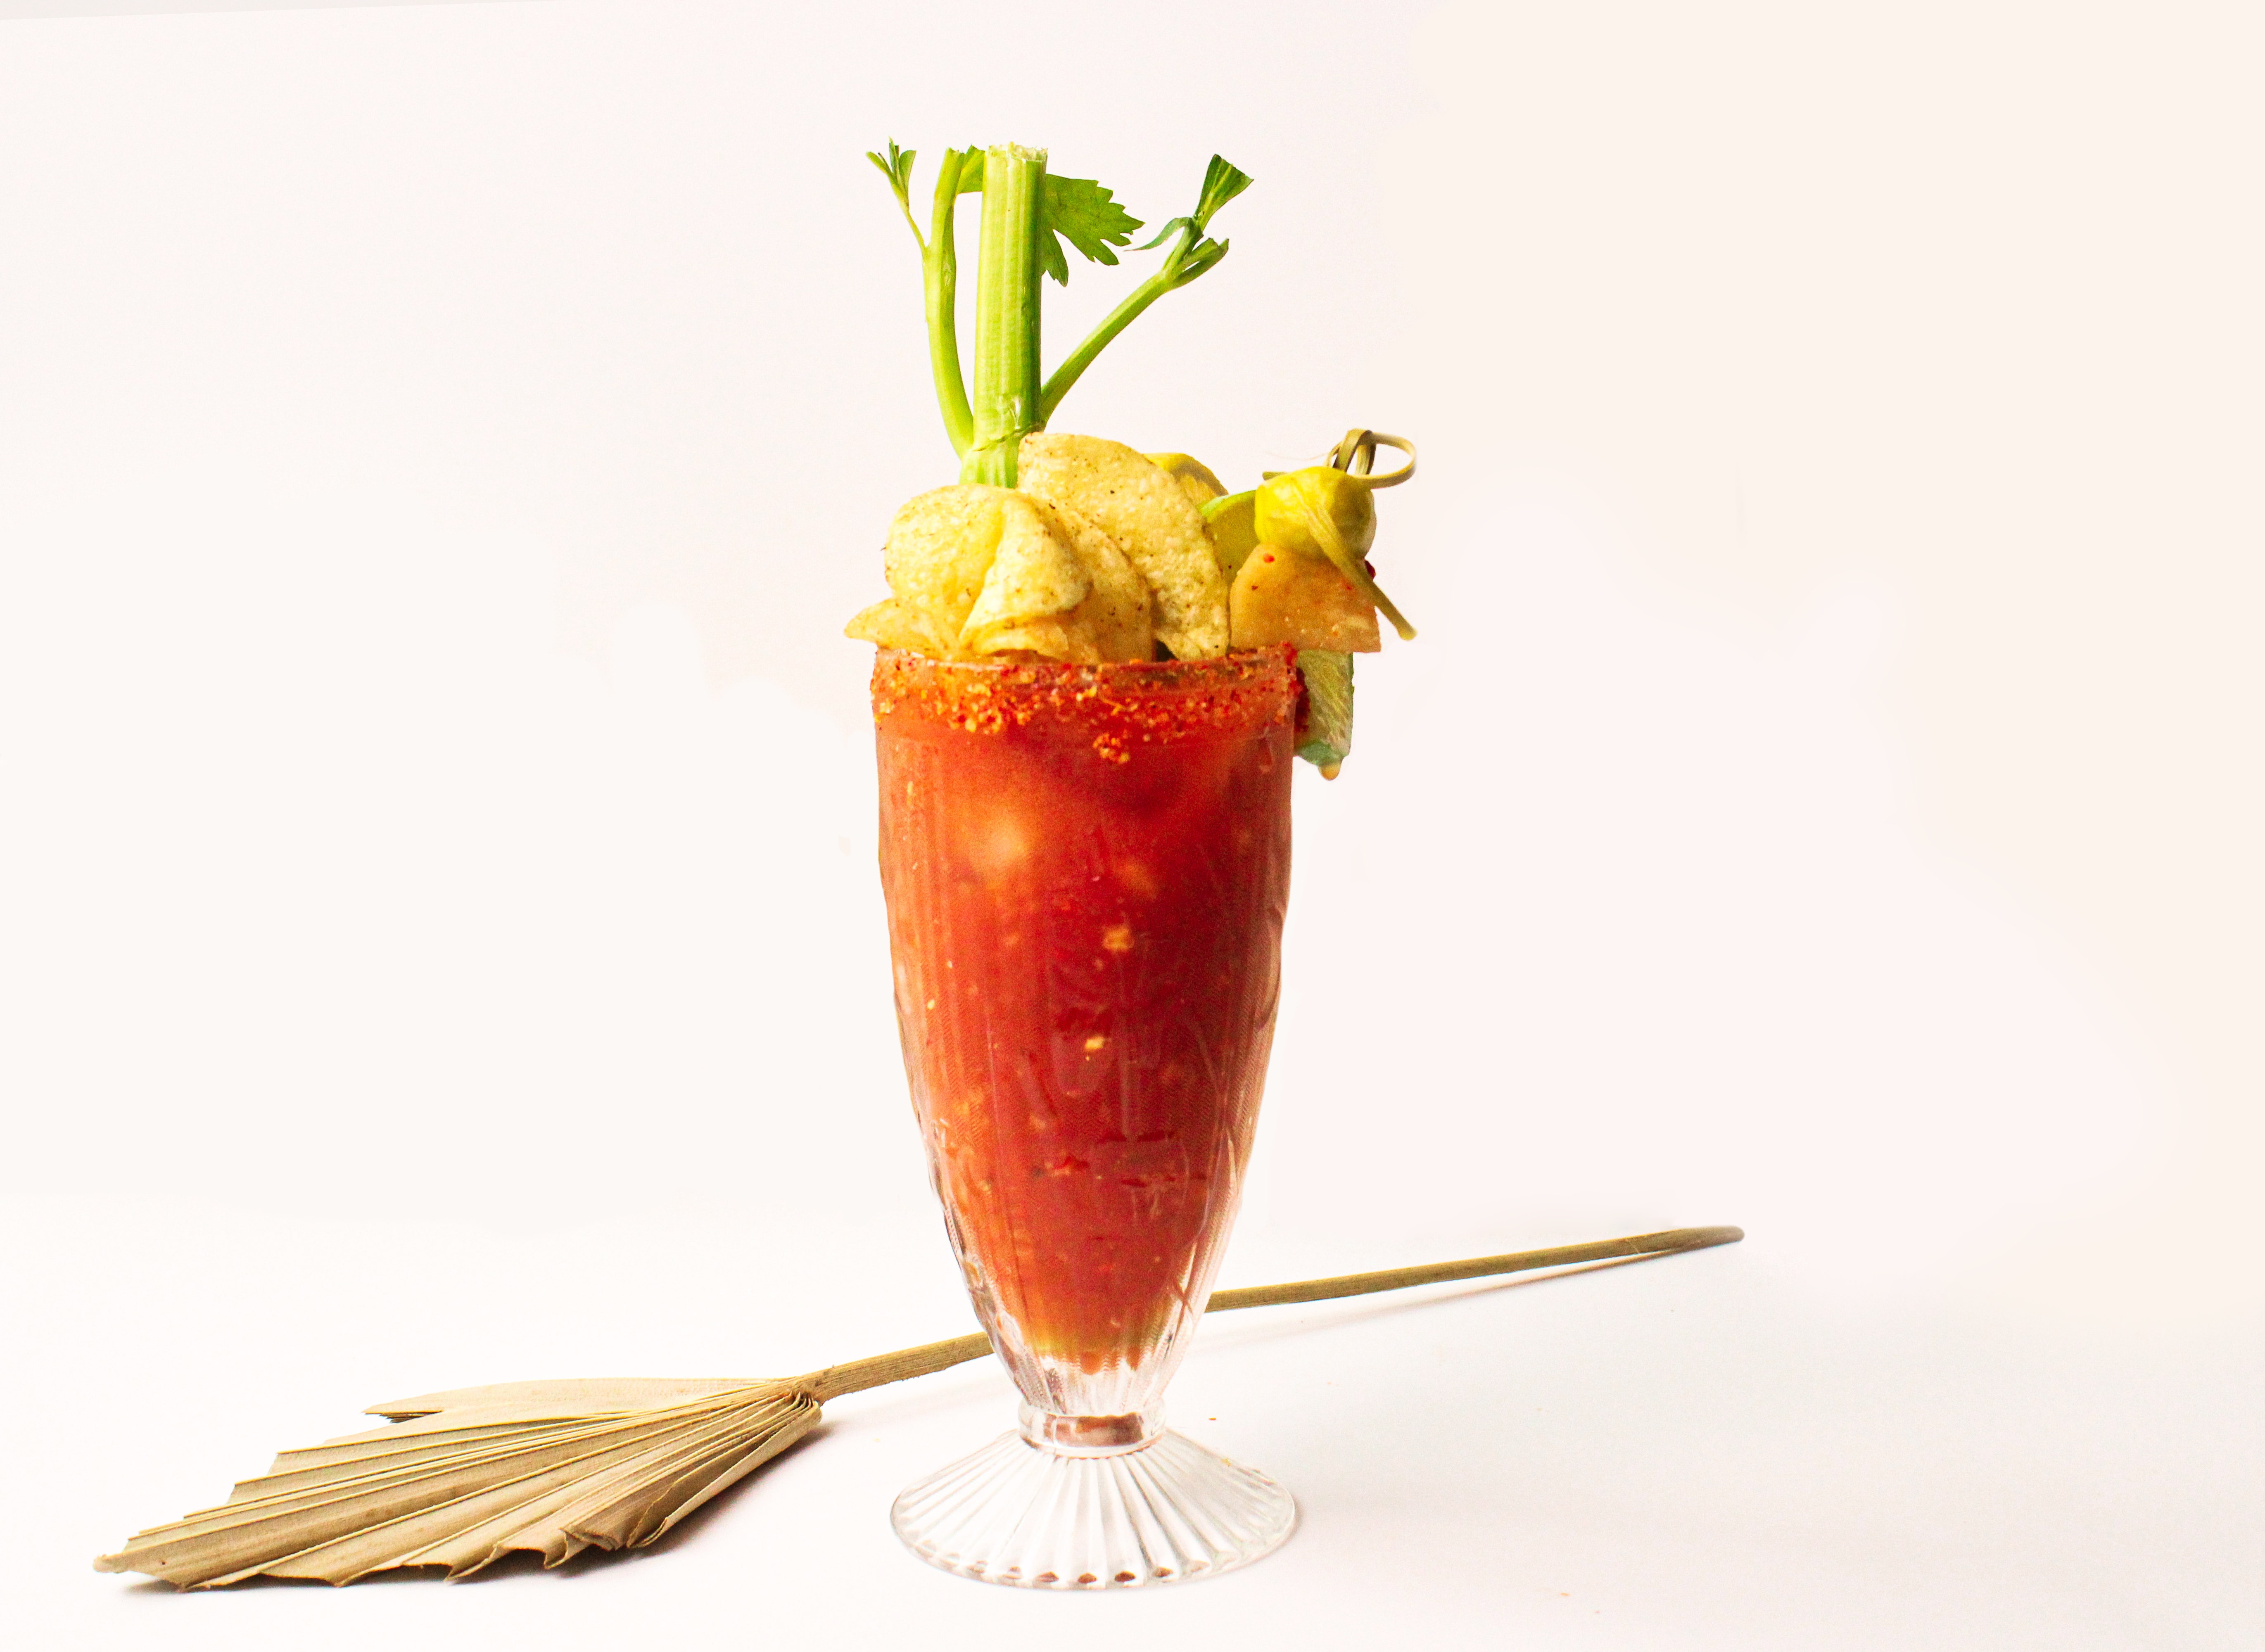 This Bloody Mary with potato chip breadcrumbs is the perfect way to toast the new year